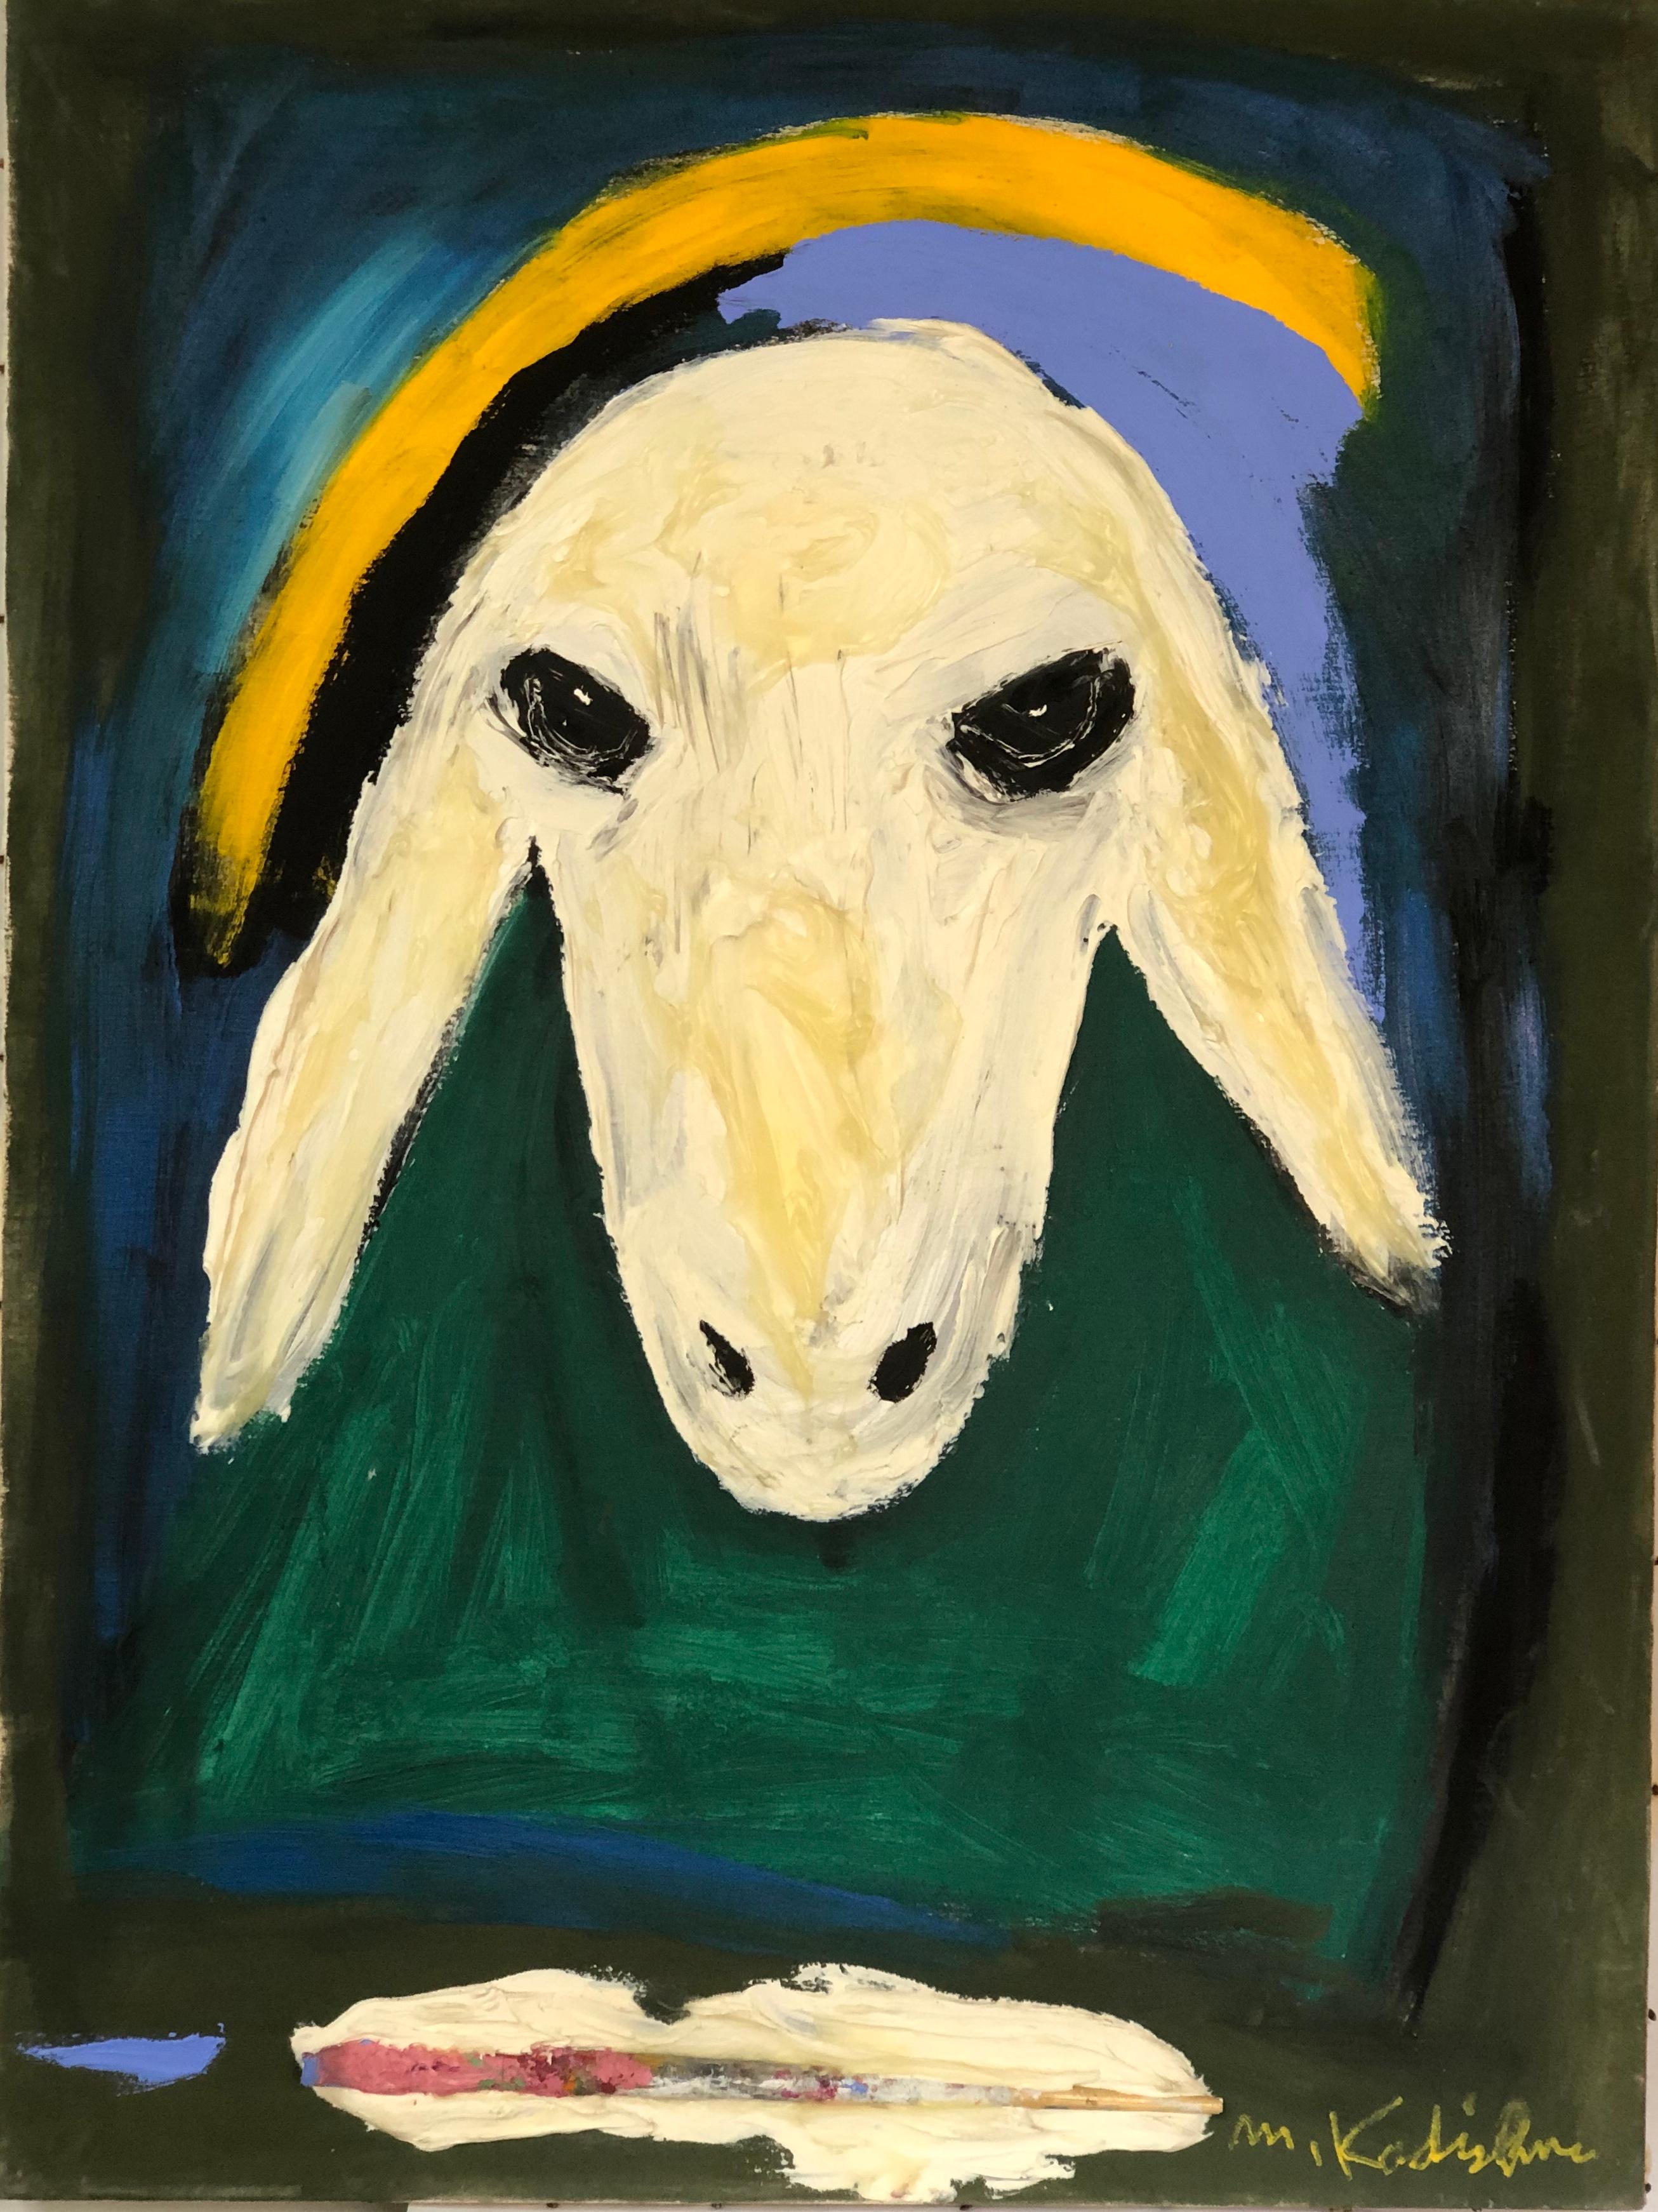 This beautiful hand painted piece by Kadishman was purchased directly from the artist.
Kadishman used  a lot oil paint for this piece it giving it a lot of texture mainly in the head of the sheep (see close up images).
Kadishman also used the brush